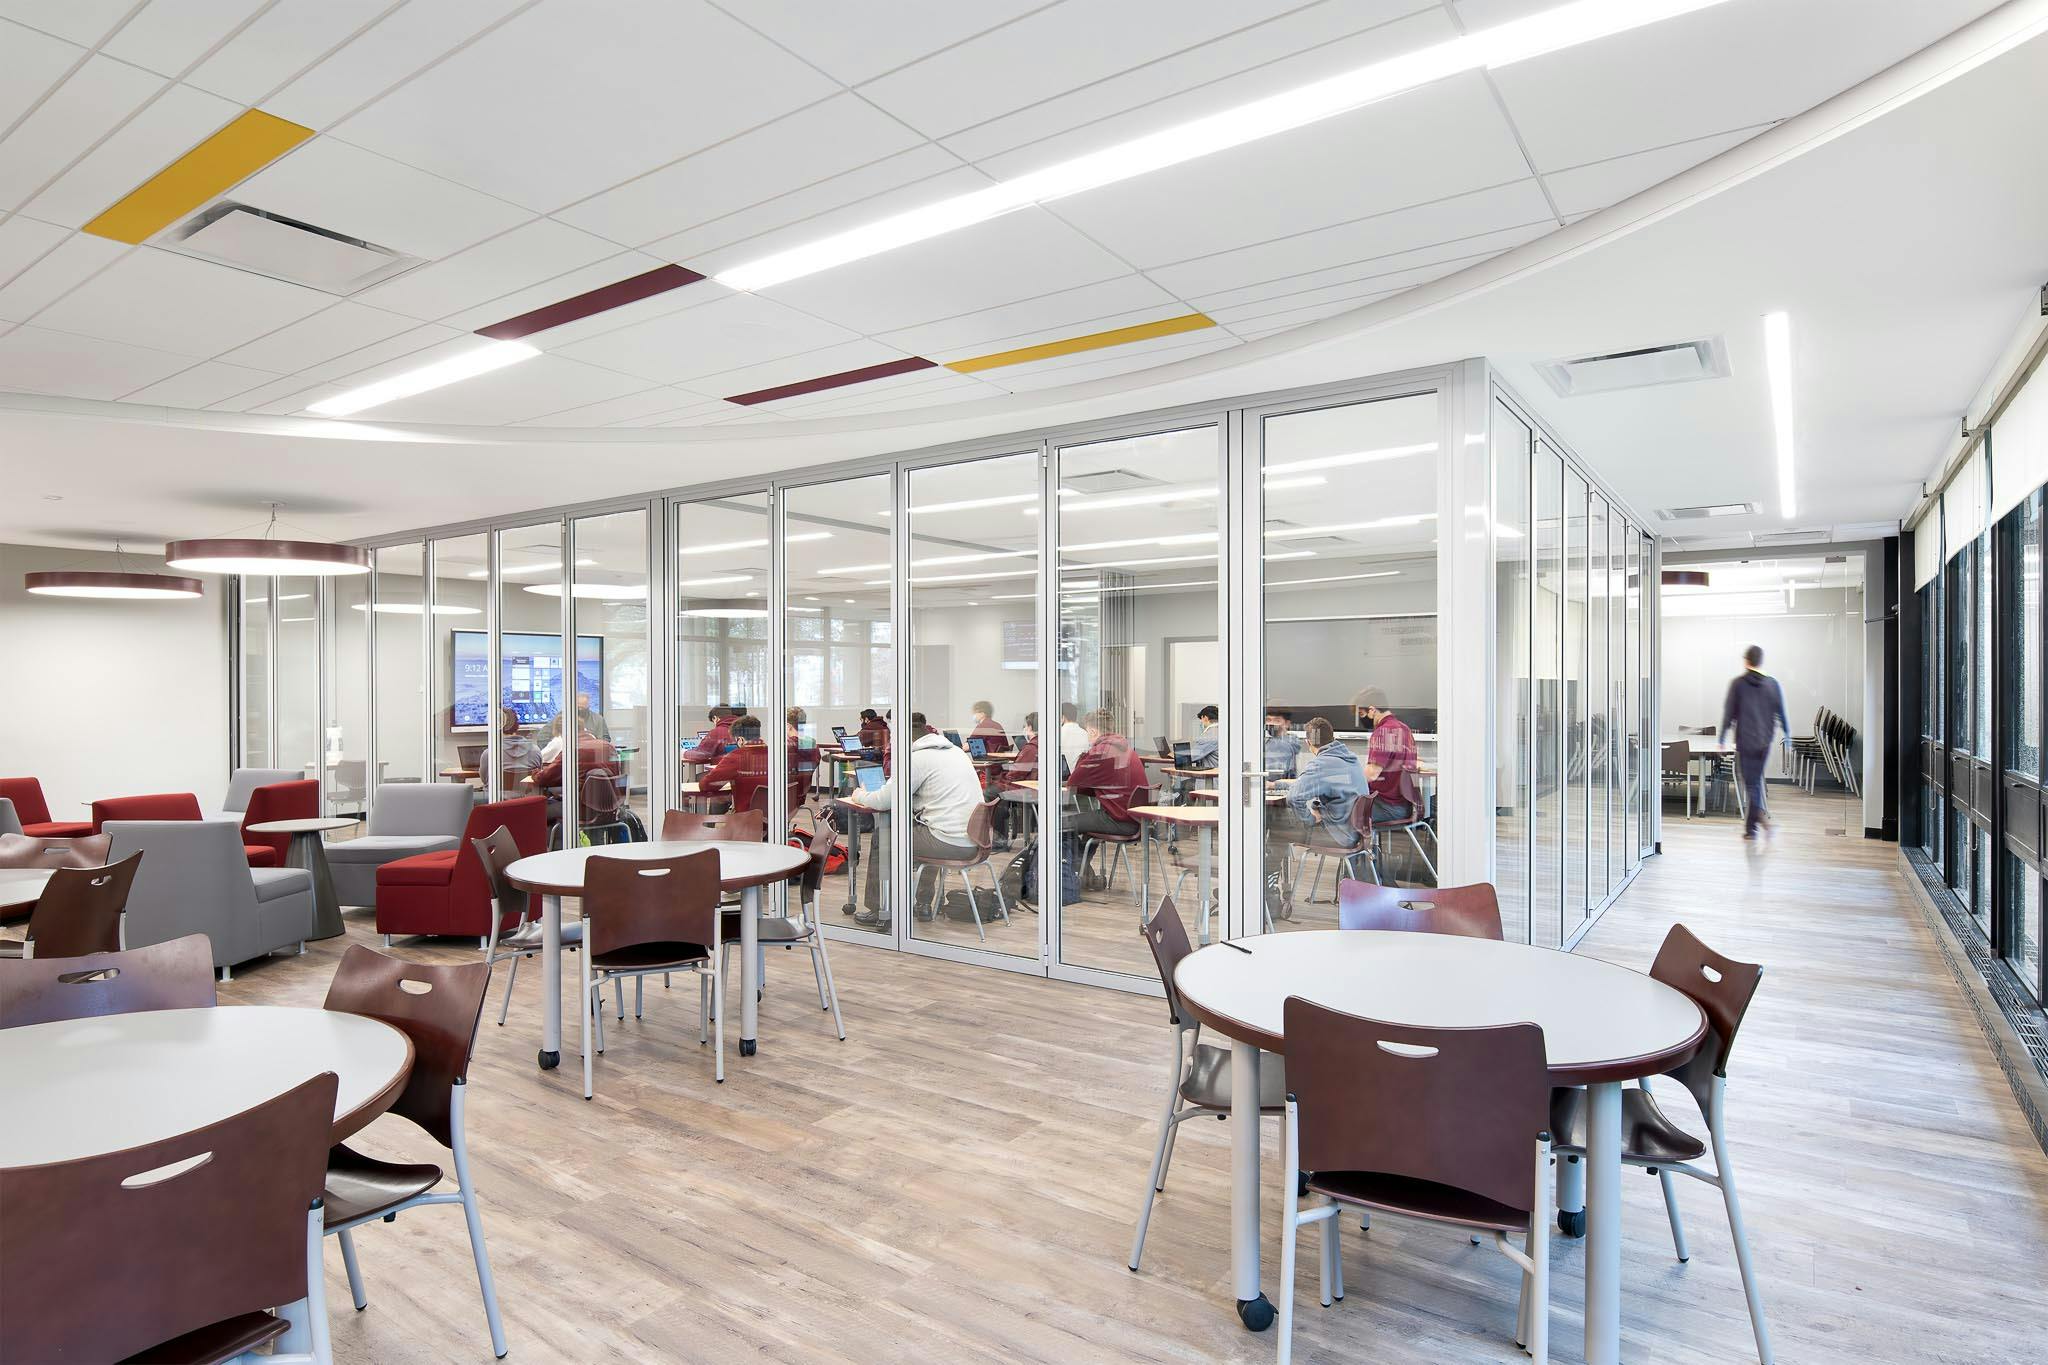 multifunctional space in schools with acoustic folding glass walls